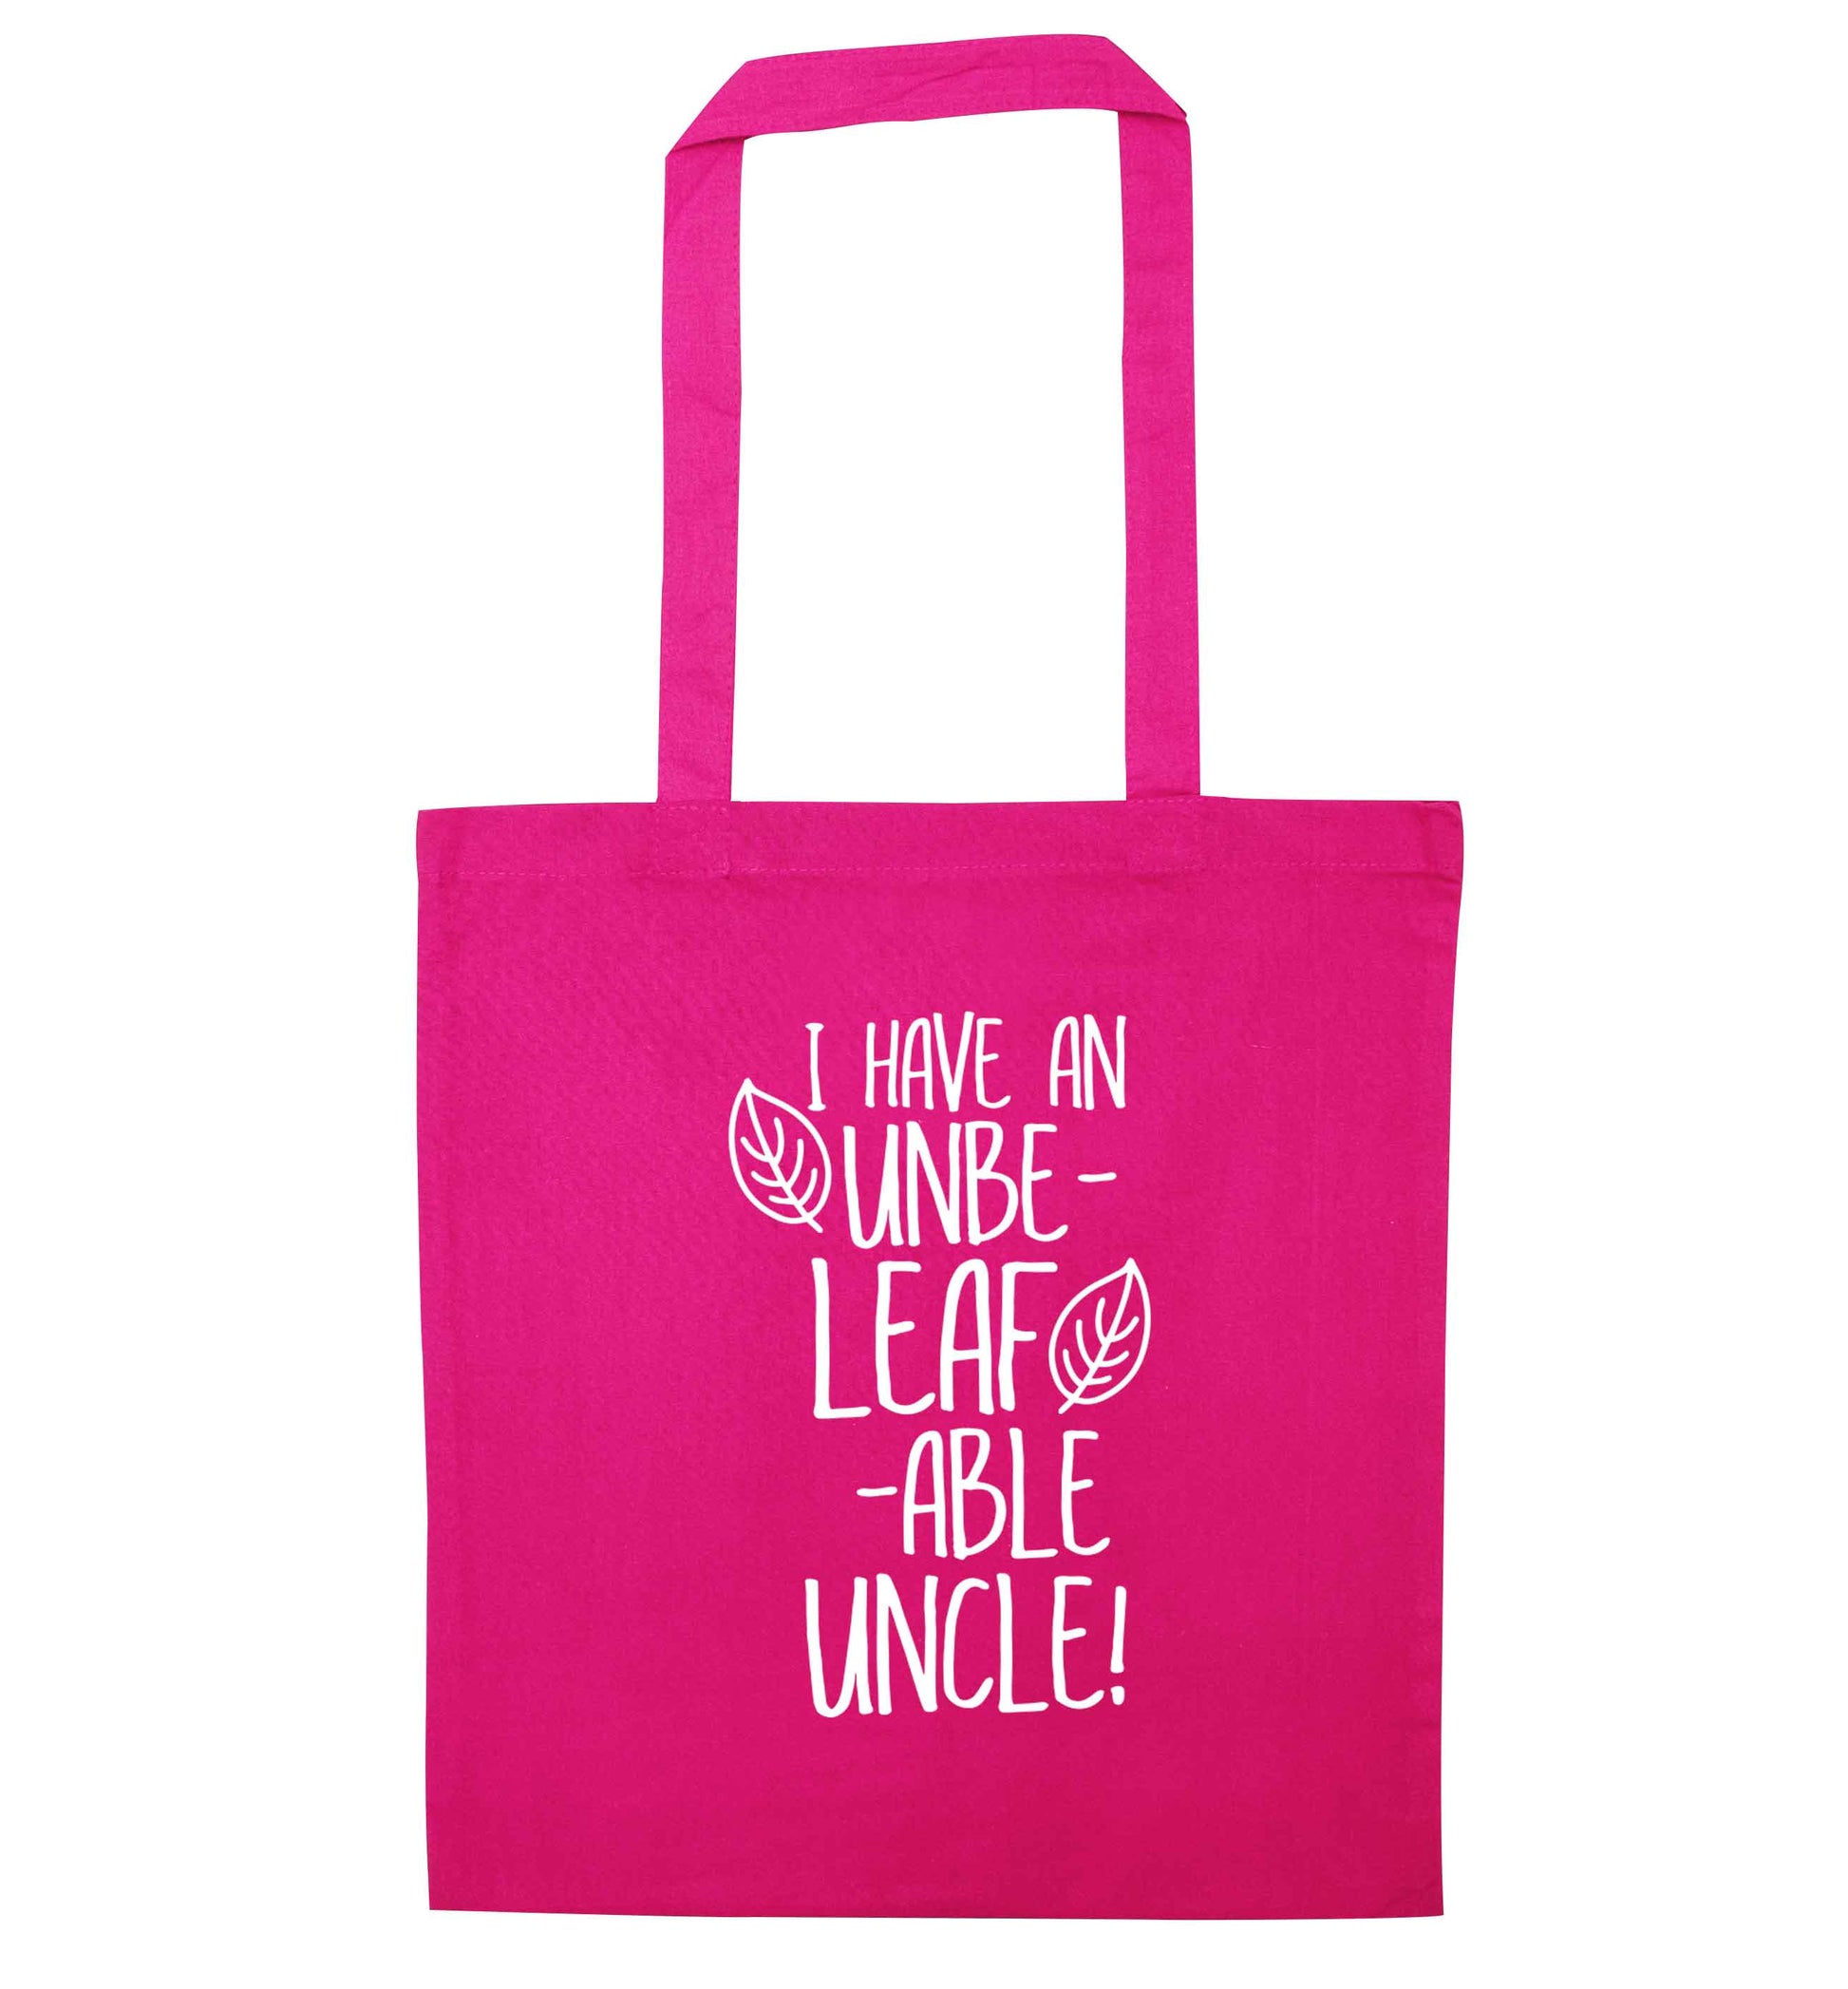 I have an unbe-leaf-able uncle pink tote bag